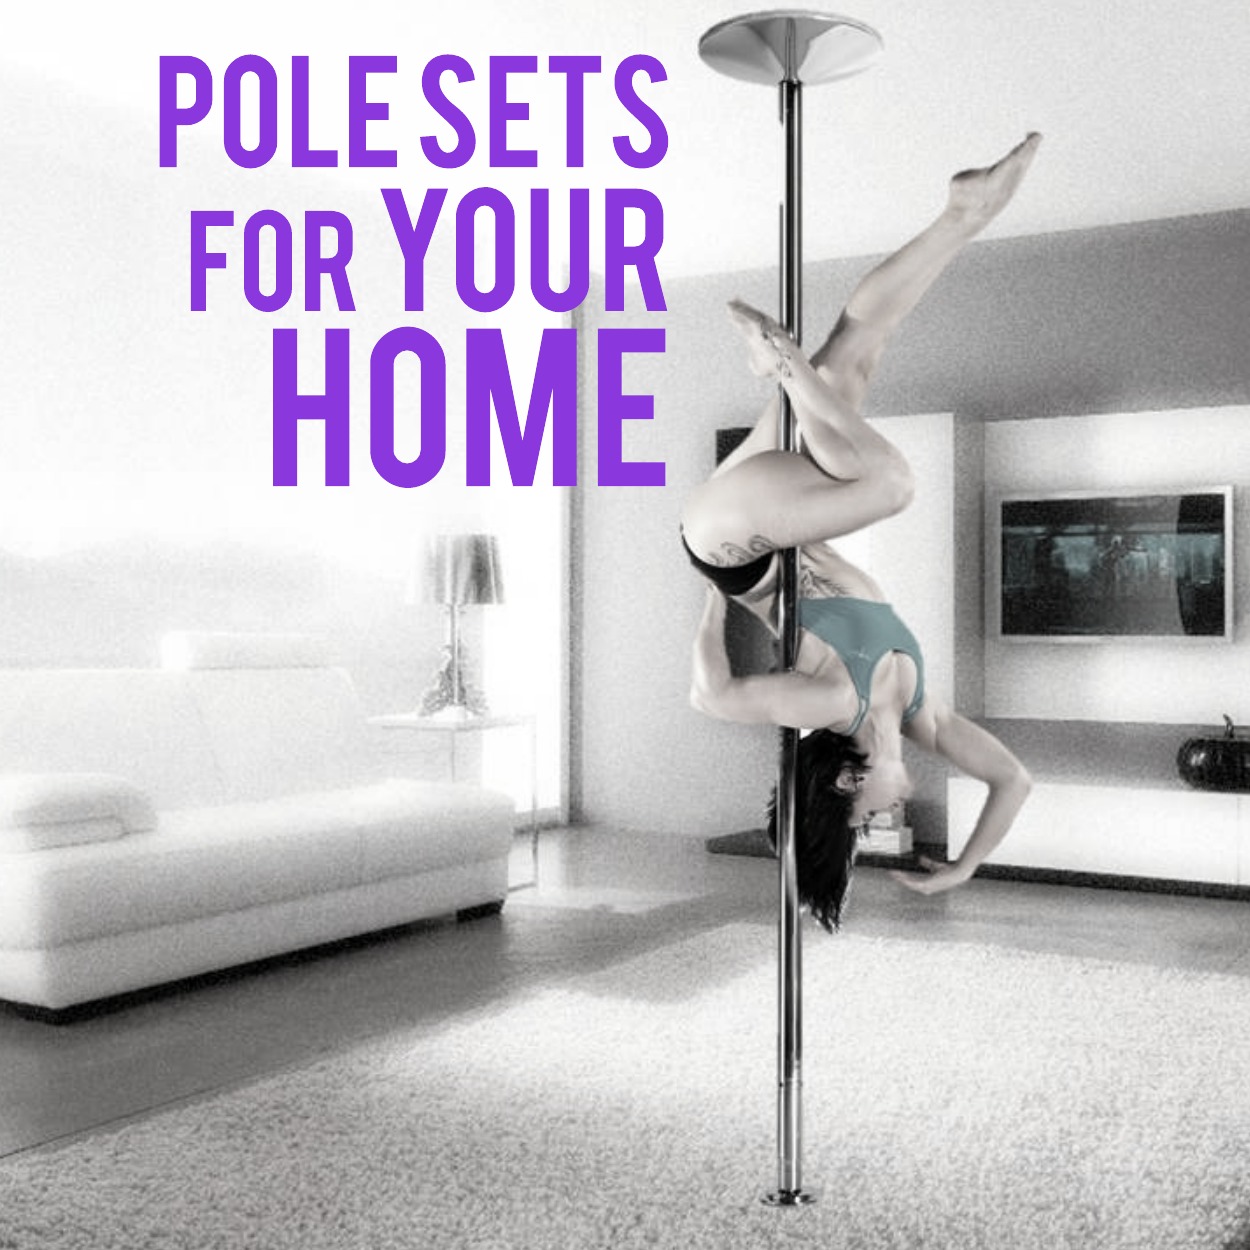 How much room do you need for a dance pole?